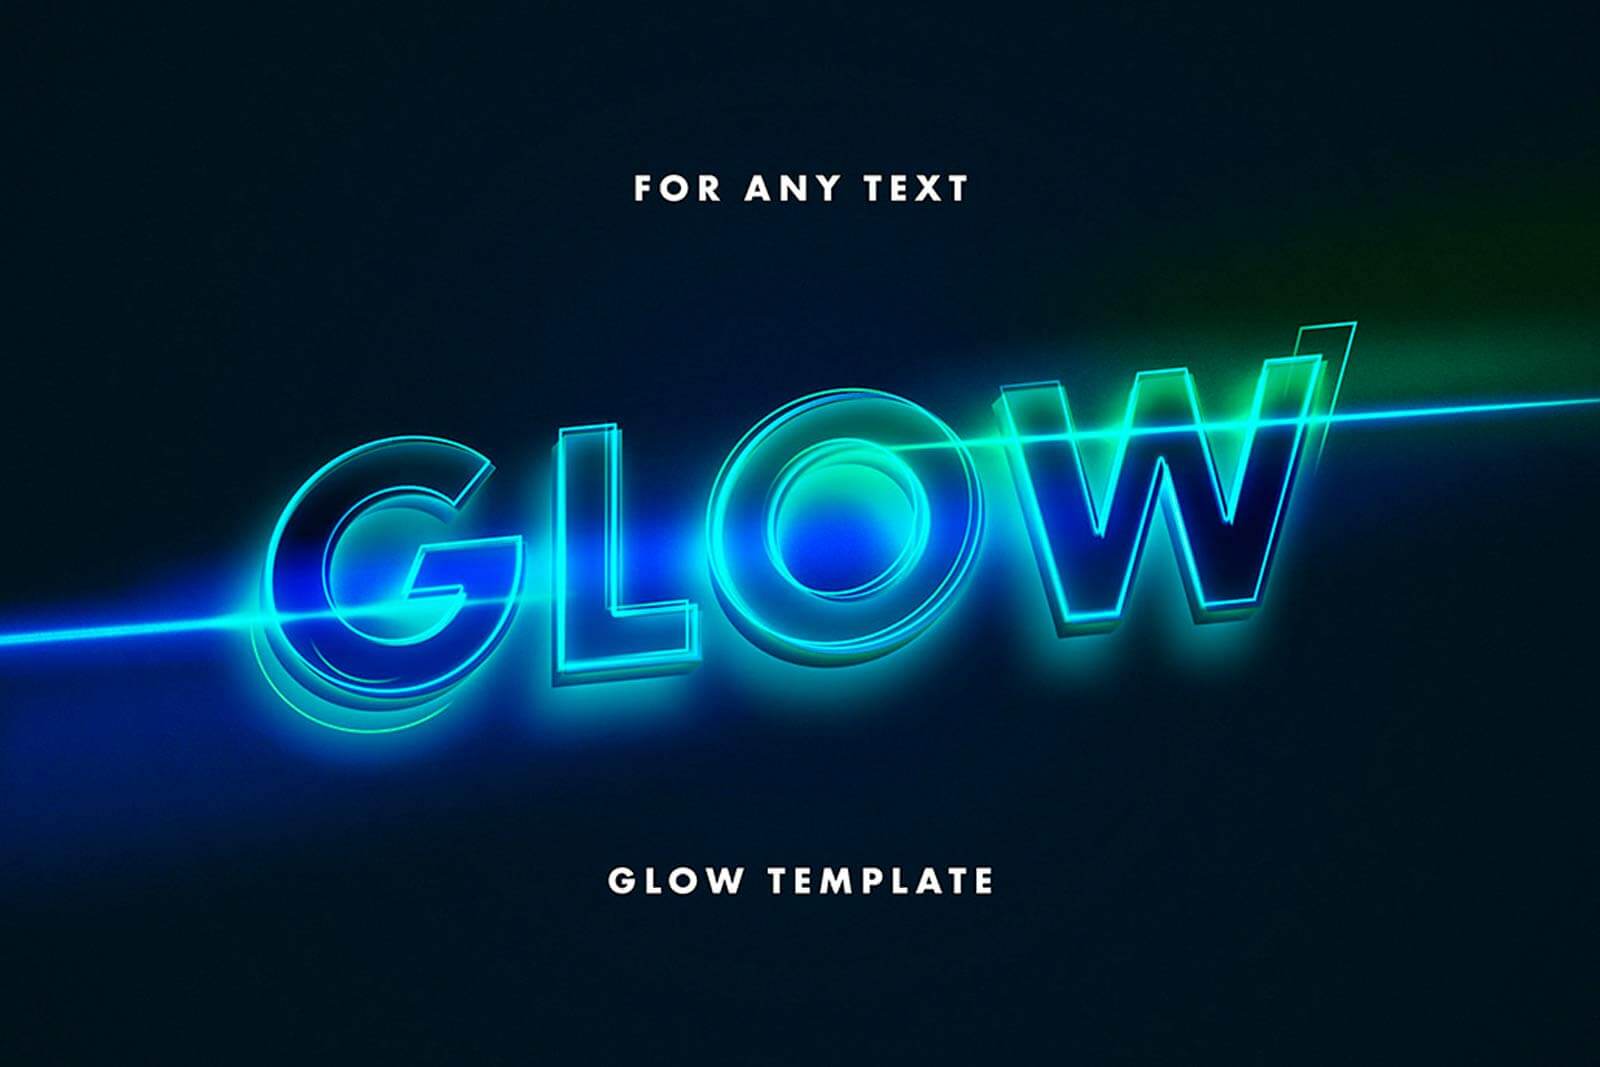 awesome photoshop text effects